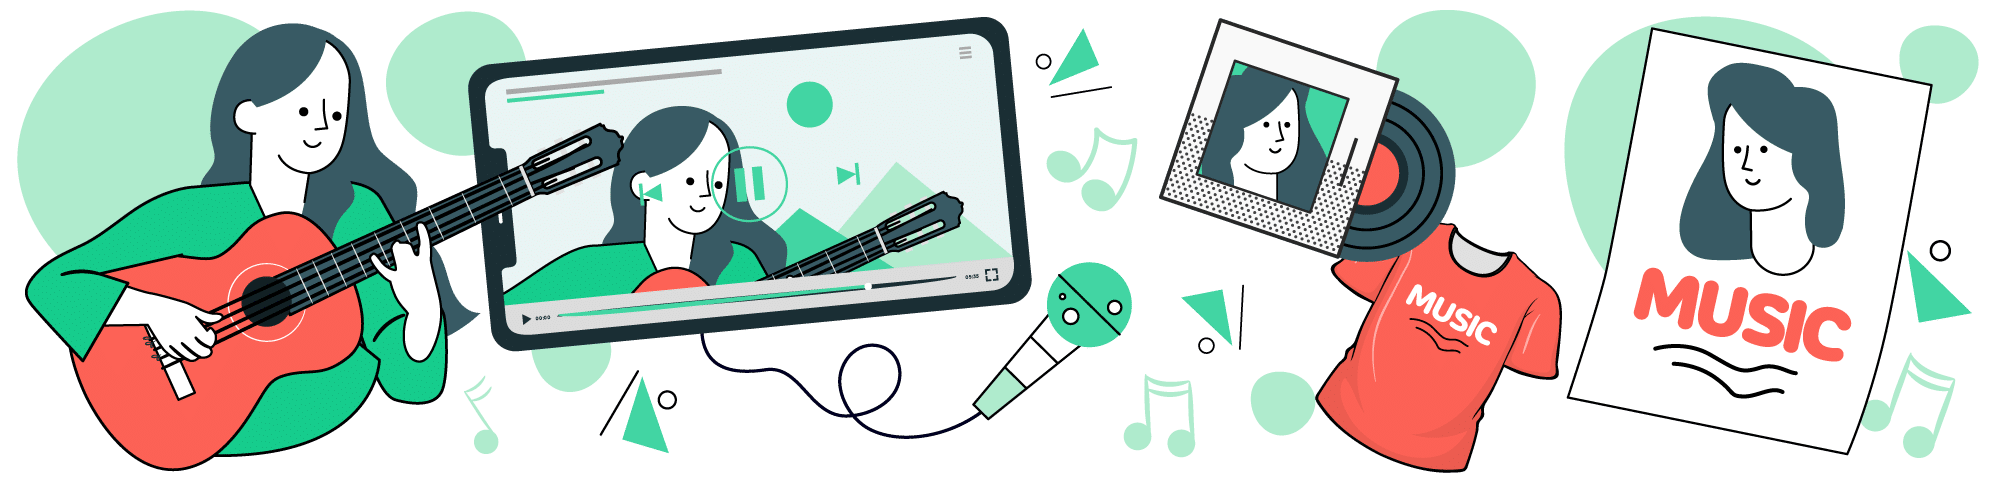 Flocksy’s Guide To Creating Visual Assets For Musicians